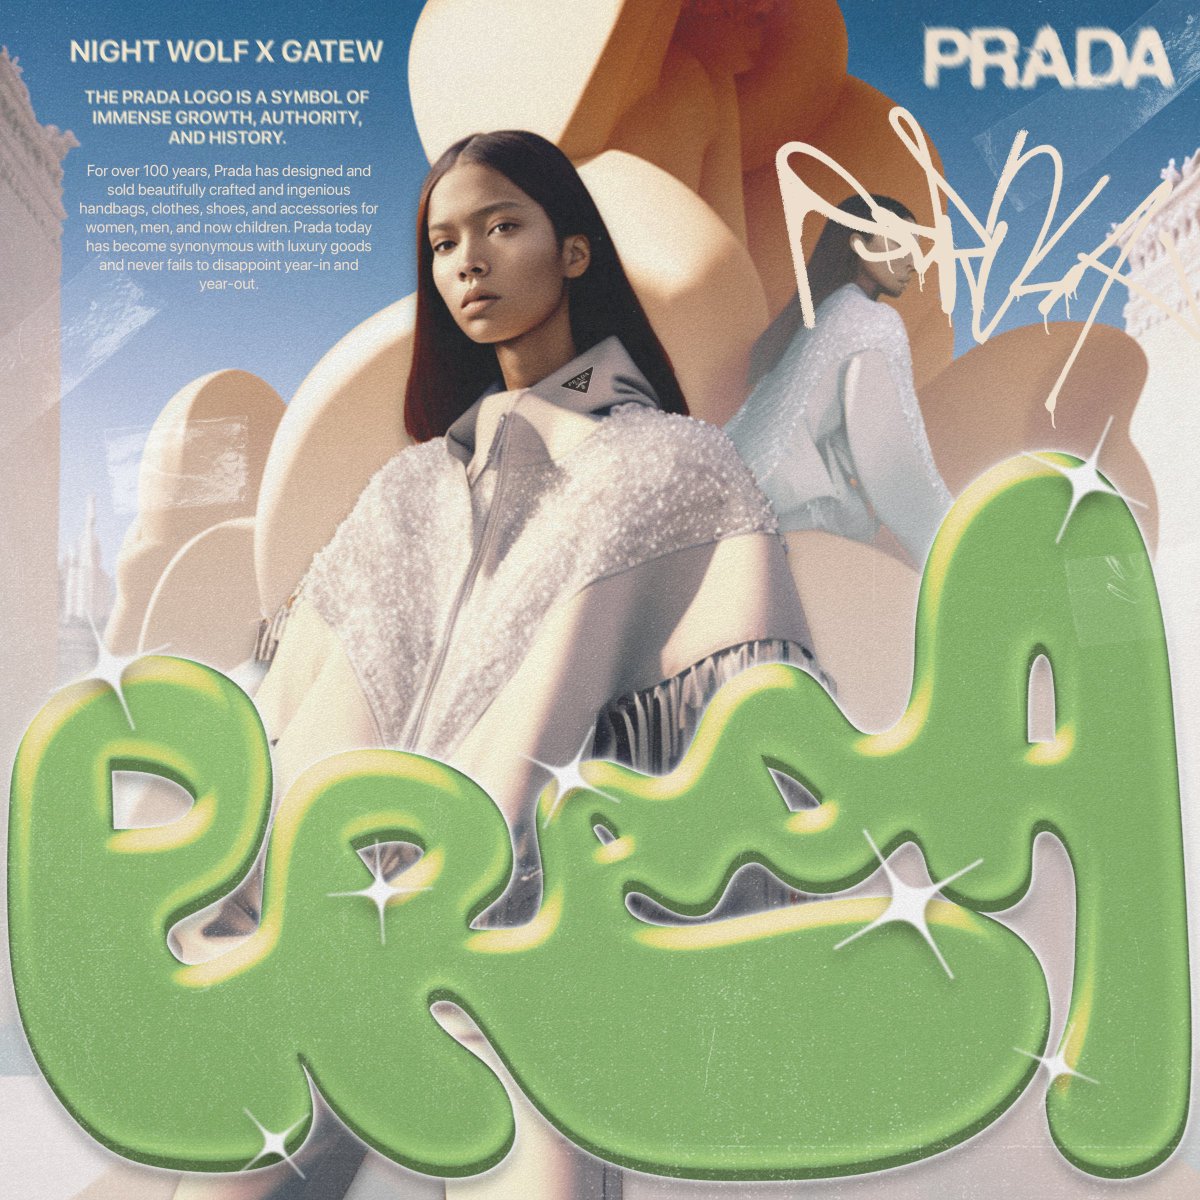 PRADA BABY PULL UP 🤍 NEW COLLAB WITH THE TW1N @gatewdesign 🥰👿 28 // 365 MY MIDJOURNEY YUHHH
.
.
.
#posterunion #dopedesign #itsnicethat #graphicdesign #theddod #photoshopartist #certainmagazine #eyeondesign #collectgraphics #visualgraphe #graphiclounge #digitalarchive